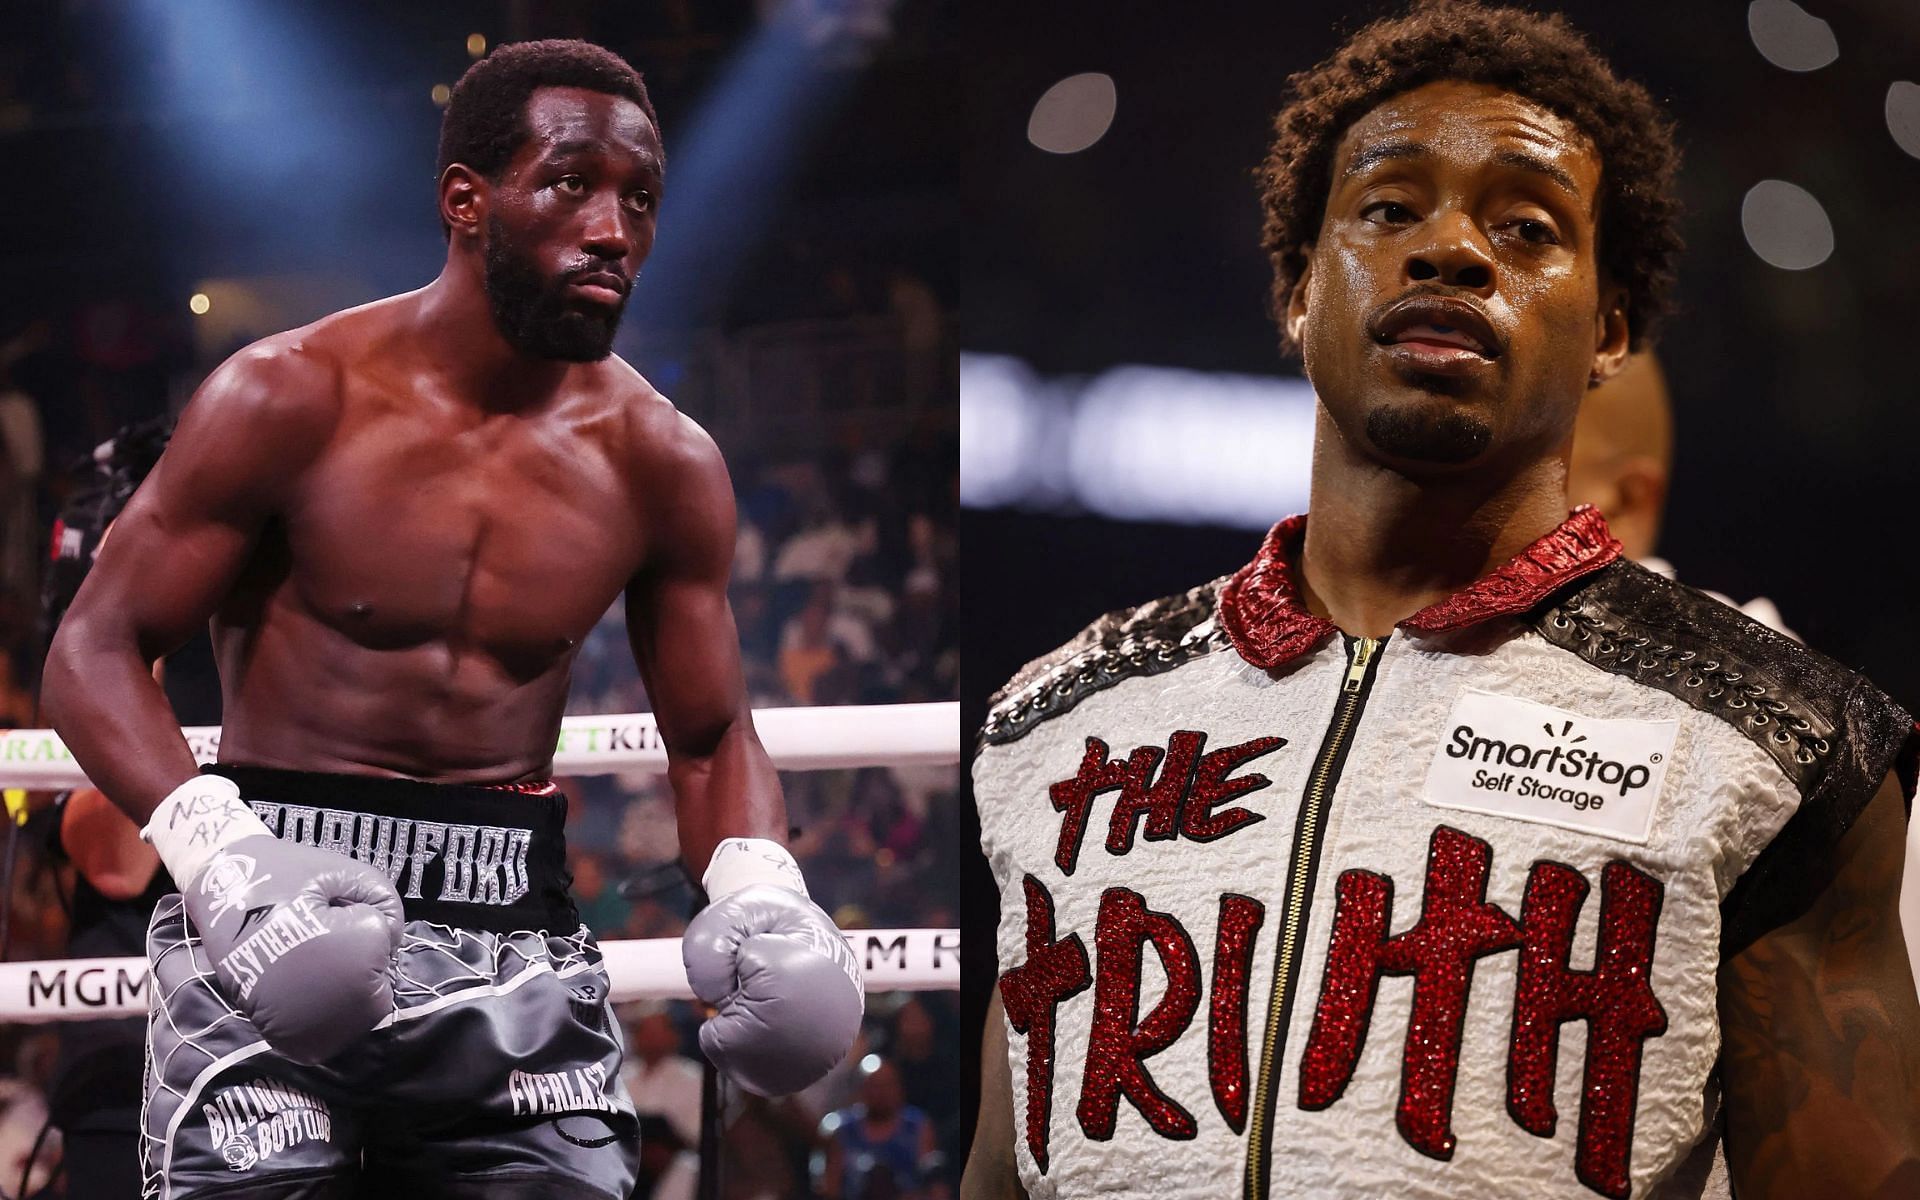 Terence Crawford (left) looks into the future following Errol Spence Jr. (right) rematch period expiring [Images Courtesy: @GettyImages]